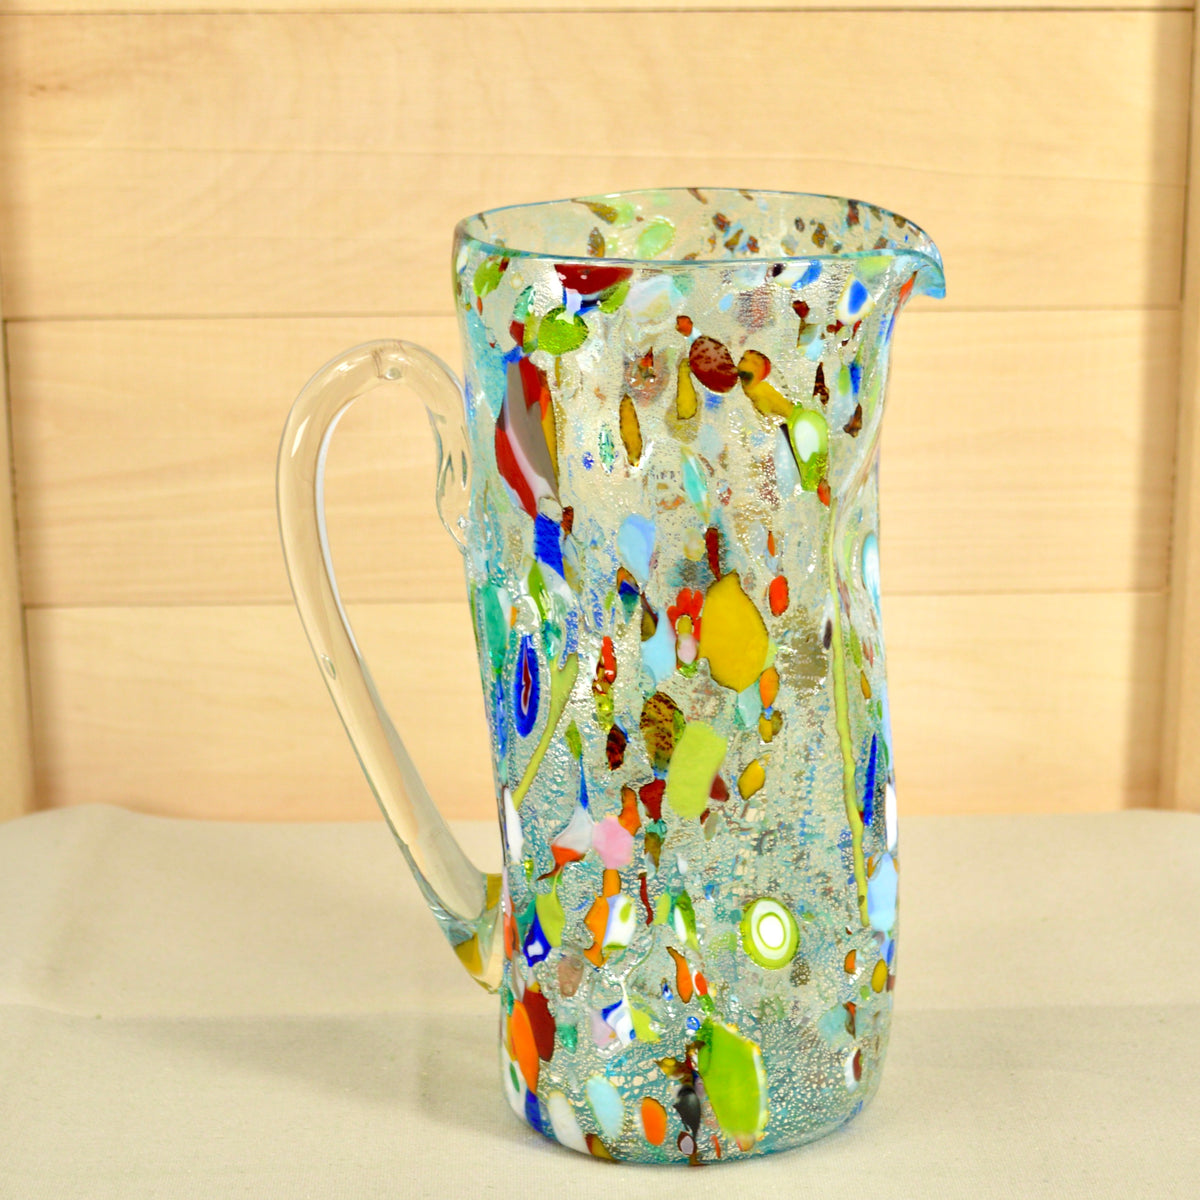 Alta Crumpled Drink Pitcher, Murano Glass, Made in Italy - My Italian Decor